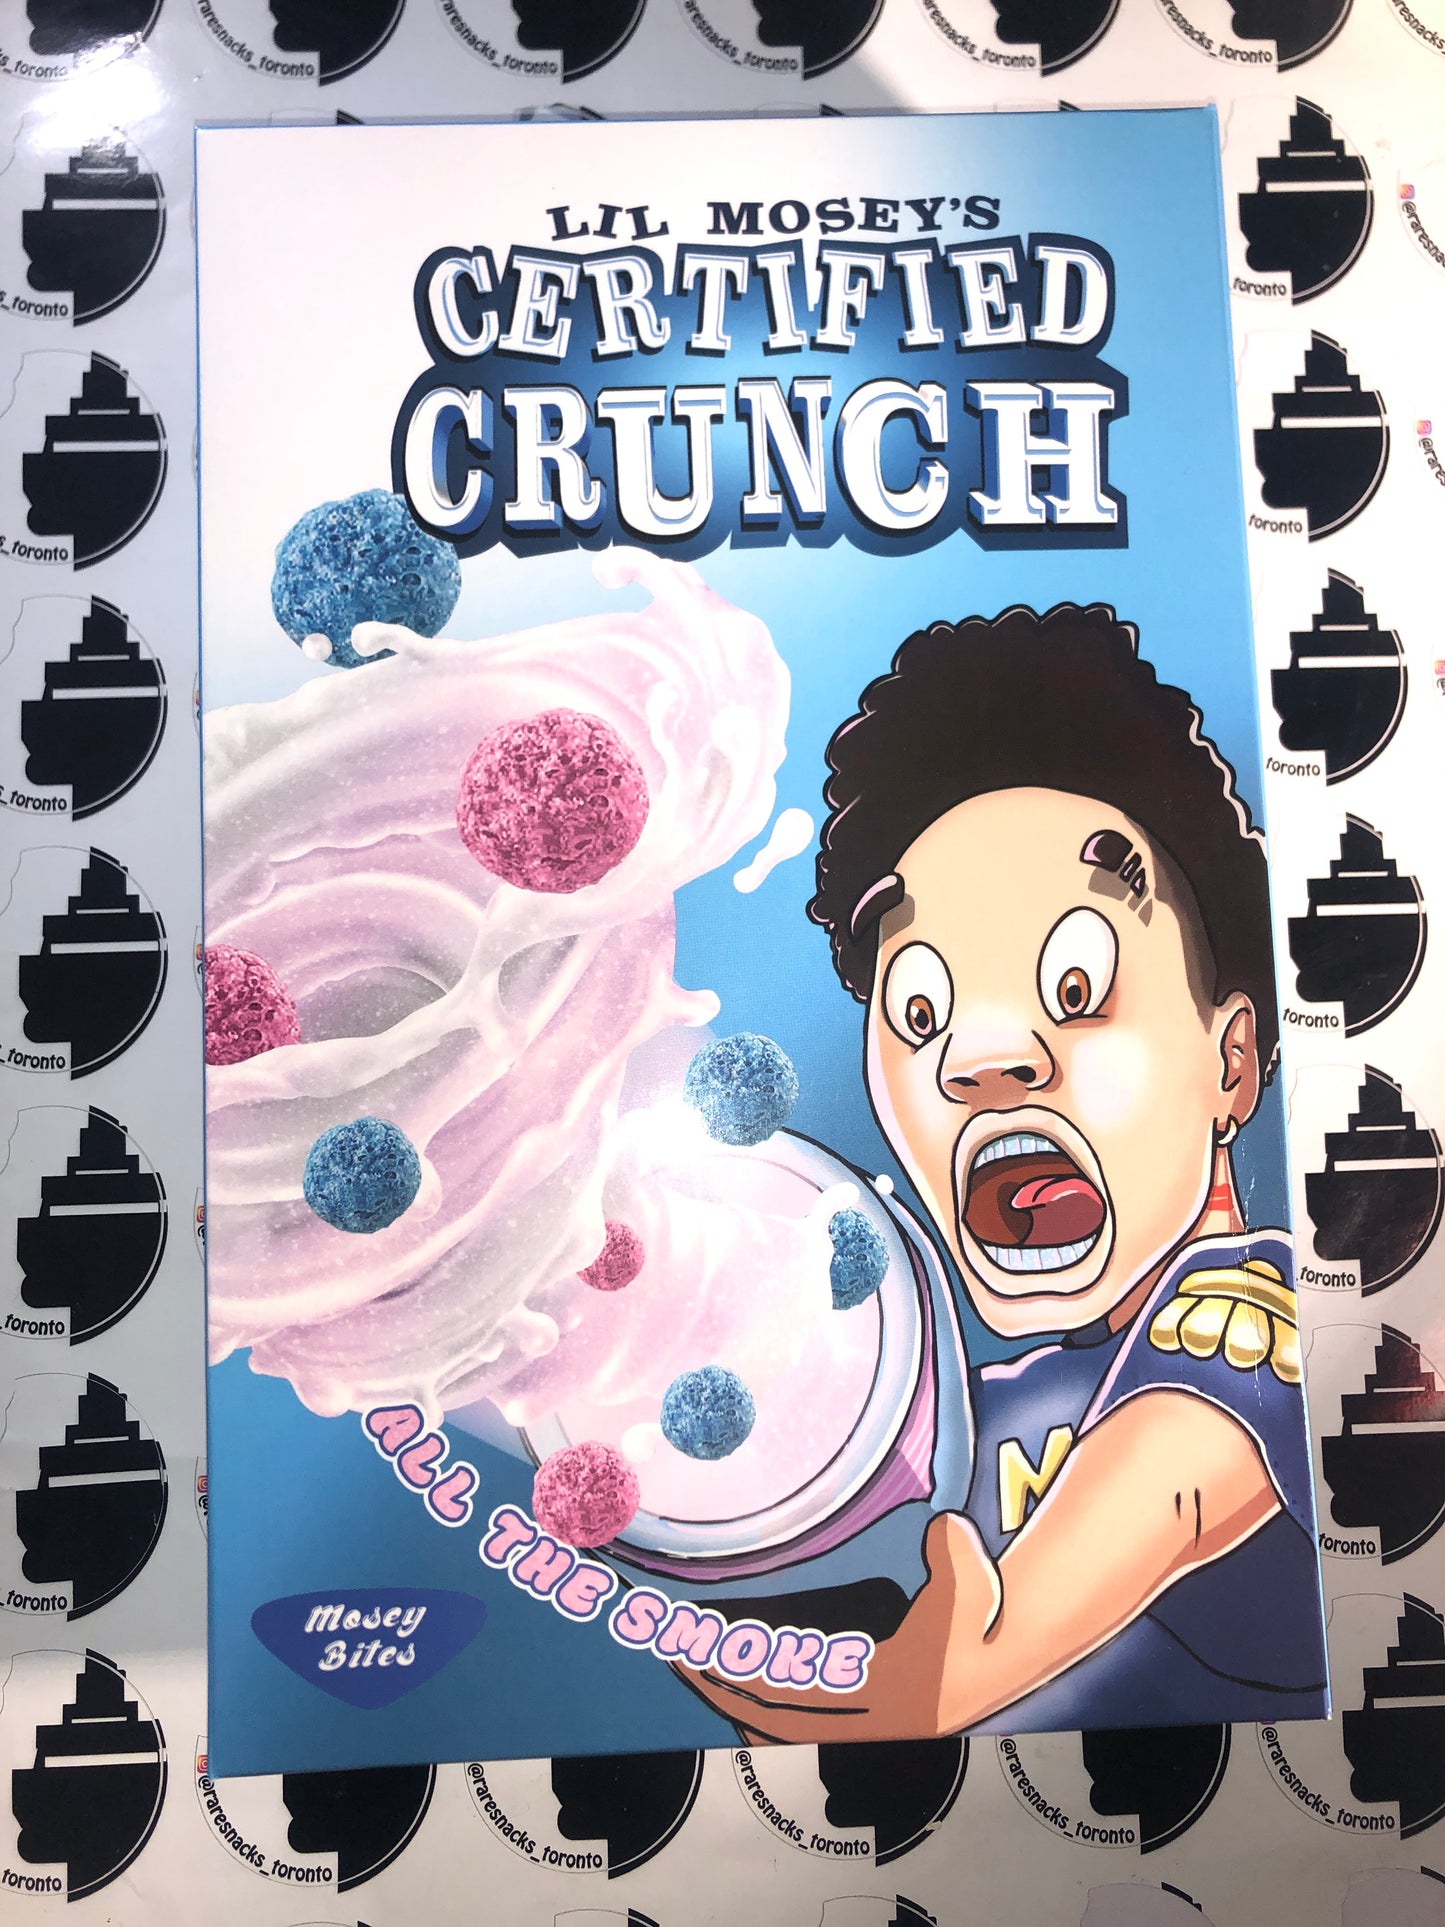 Lil Mosey’s Certified Crunch Cereal